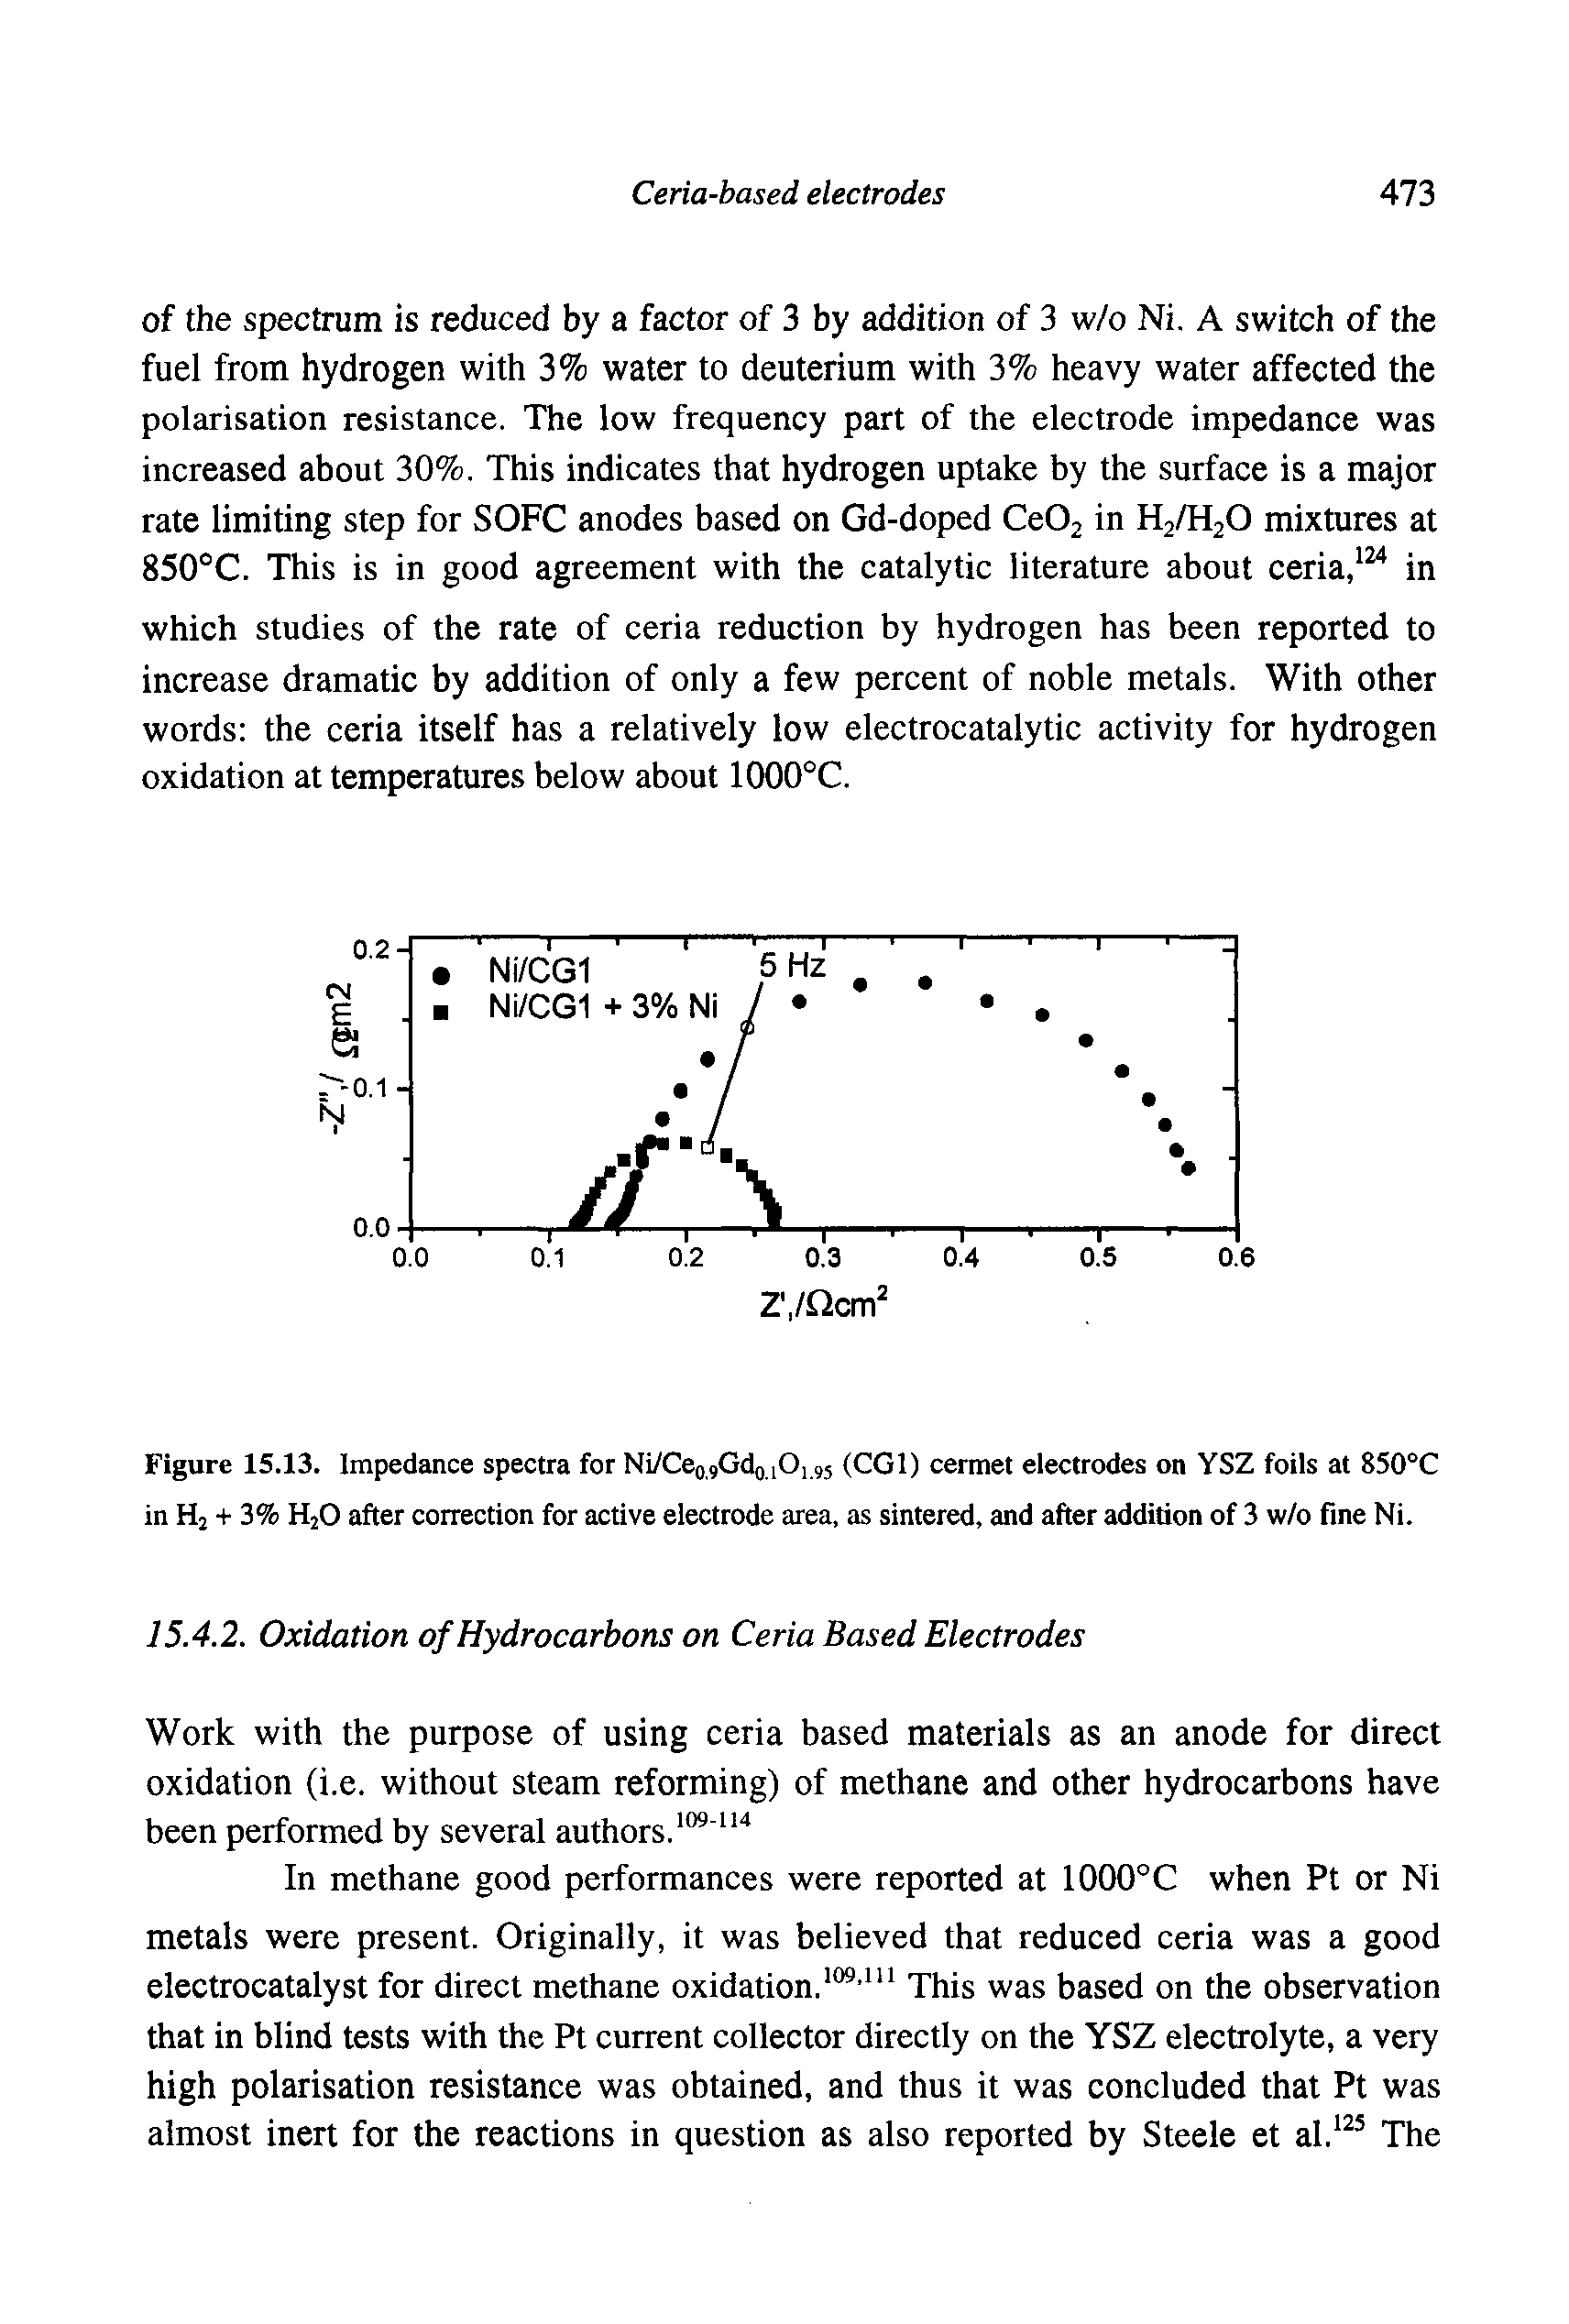 Figure 15.13. Impedance spectra for Ni/Ceo9Gdo.iOi 95 (CGI) cermet electrodes on YSZ foils at 850°C in Hj + 3% H2O after correction for active electrode area, as sintered, and after addition of 3 w/o fine Ni.